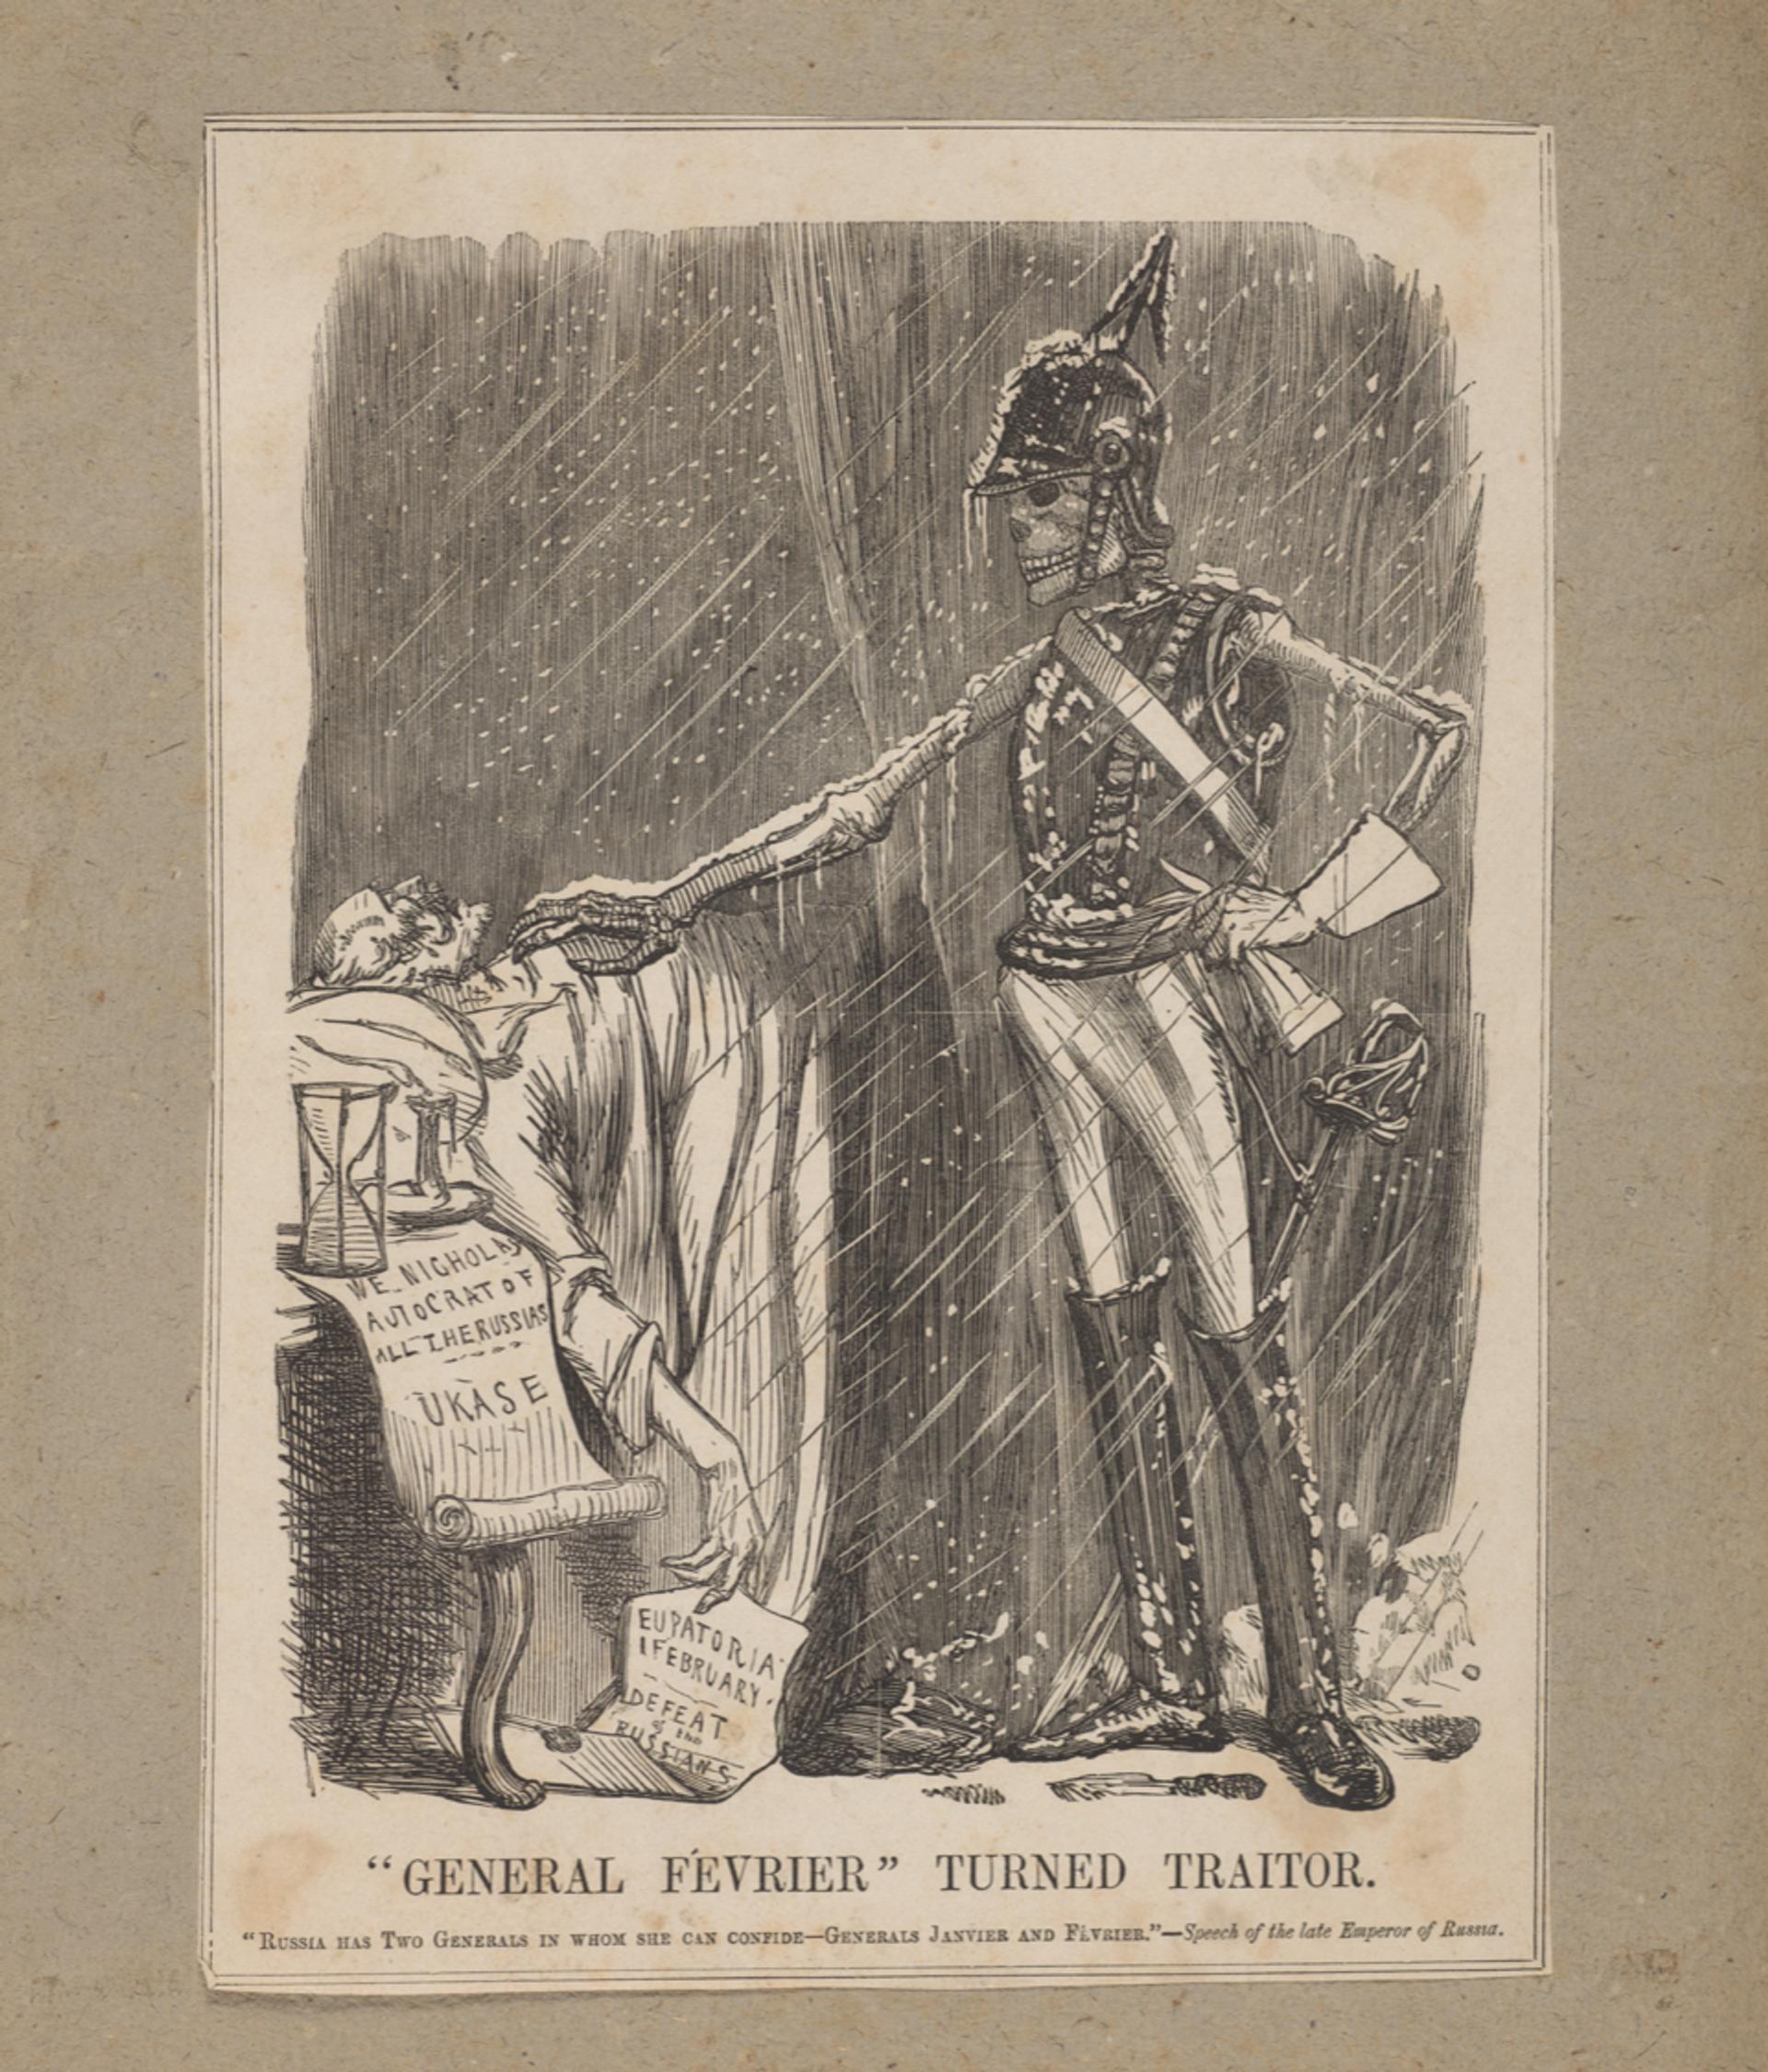 Van Gogh’s mounted copy of John Leech’s "Russia has Two Generals in whom she can confide – Generals Janvier and Février [January and February]”, Punch, 10 March 1855. © Van Gogh Museum, Amsterdam (Vincent van Gogh Foundation)